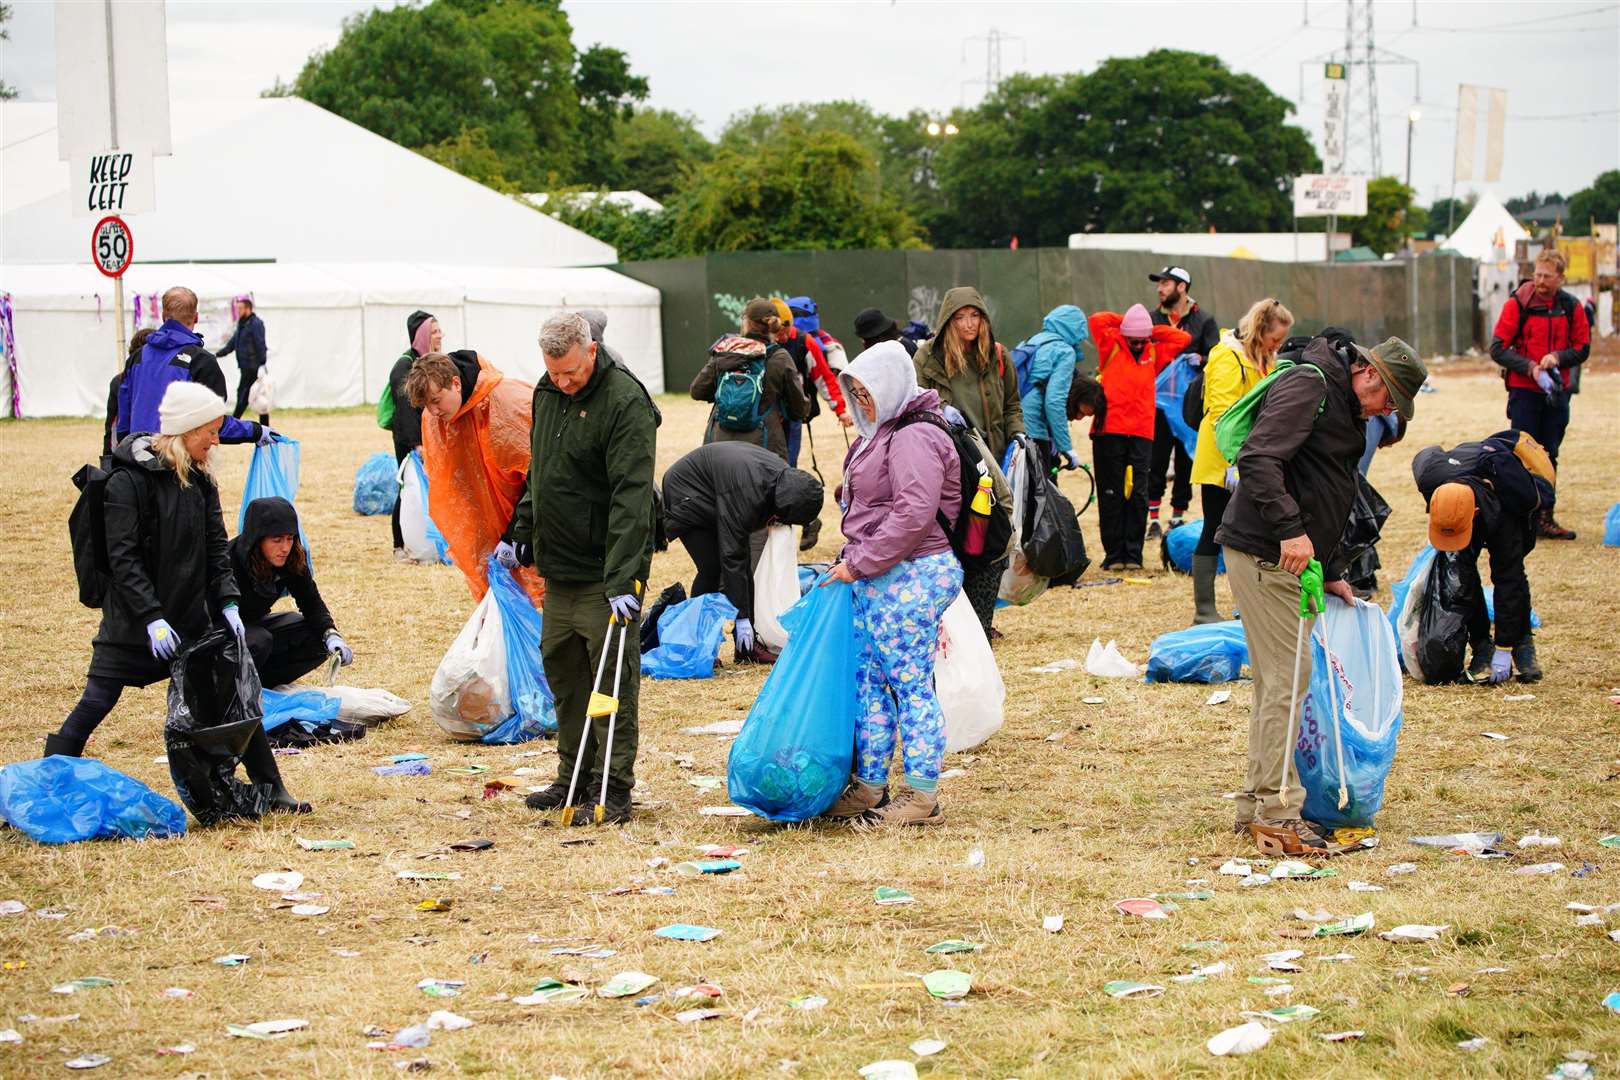 Litter-pickers work to clear the mess left by thousands of revellers (Ben Birchall/PA)